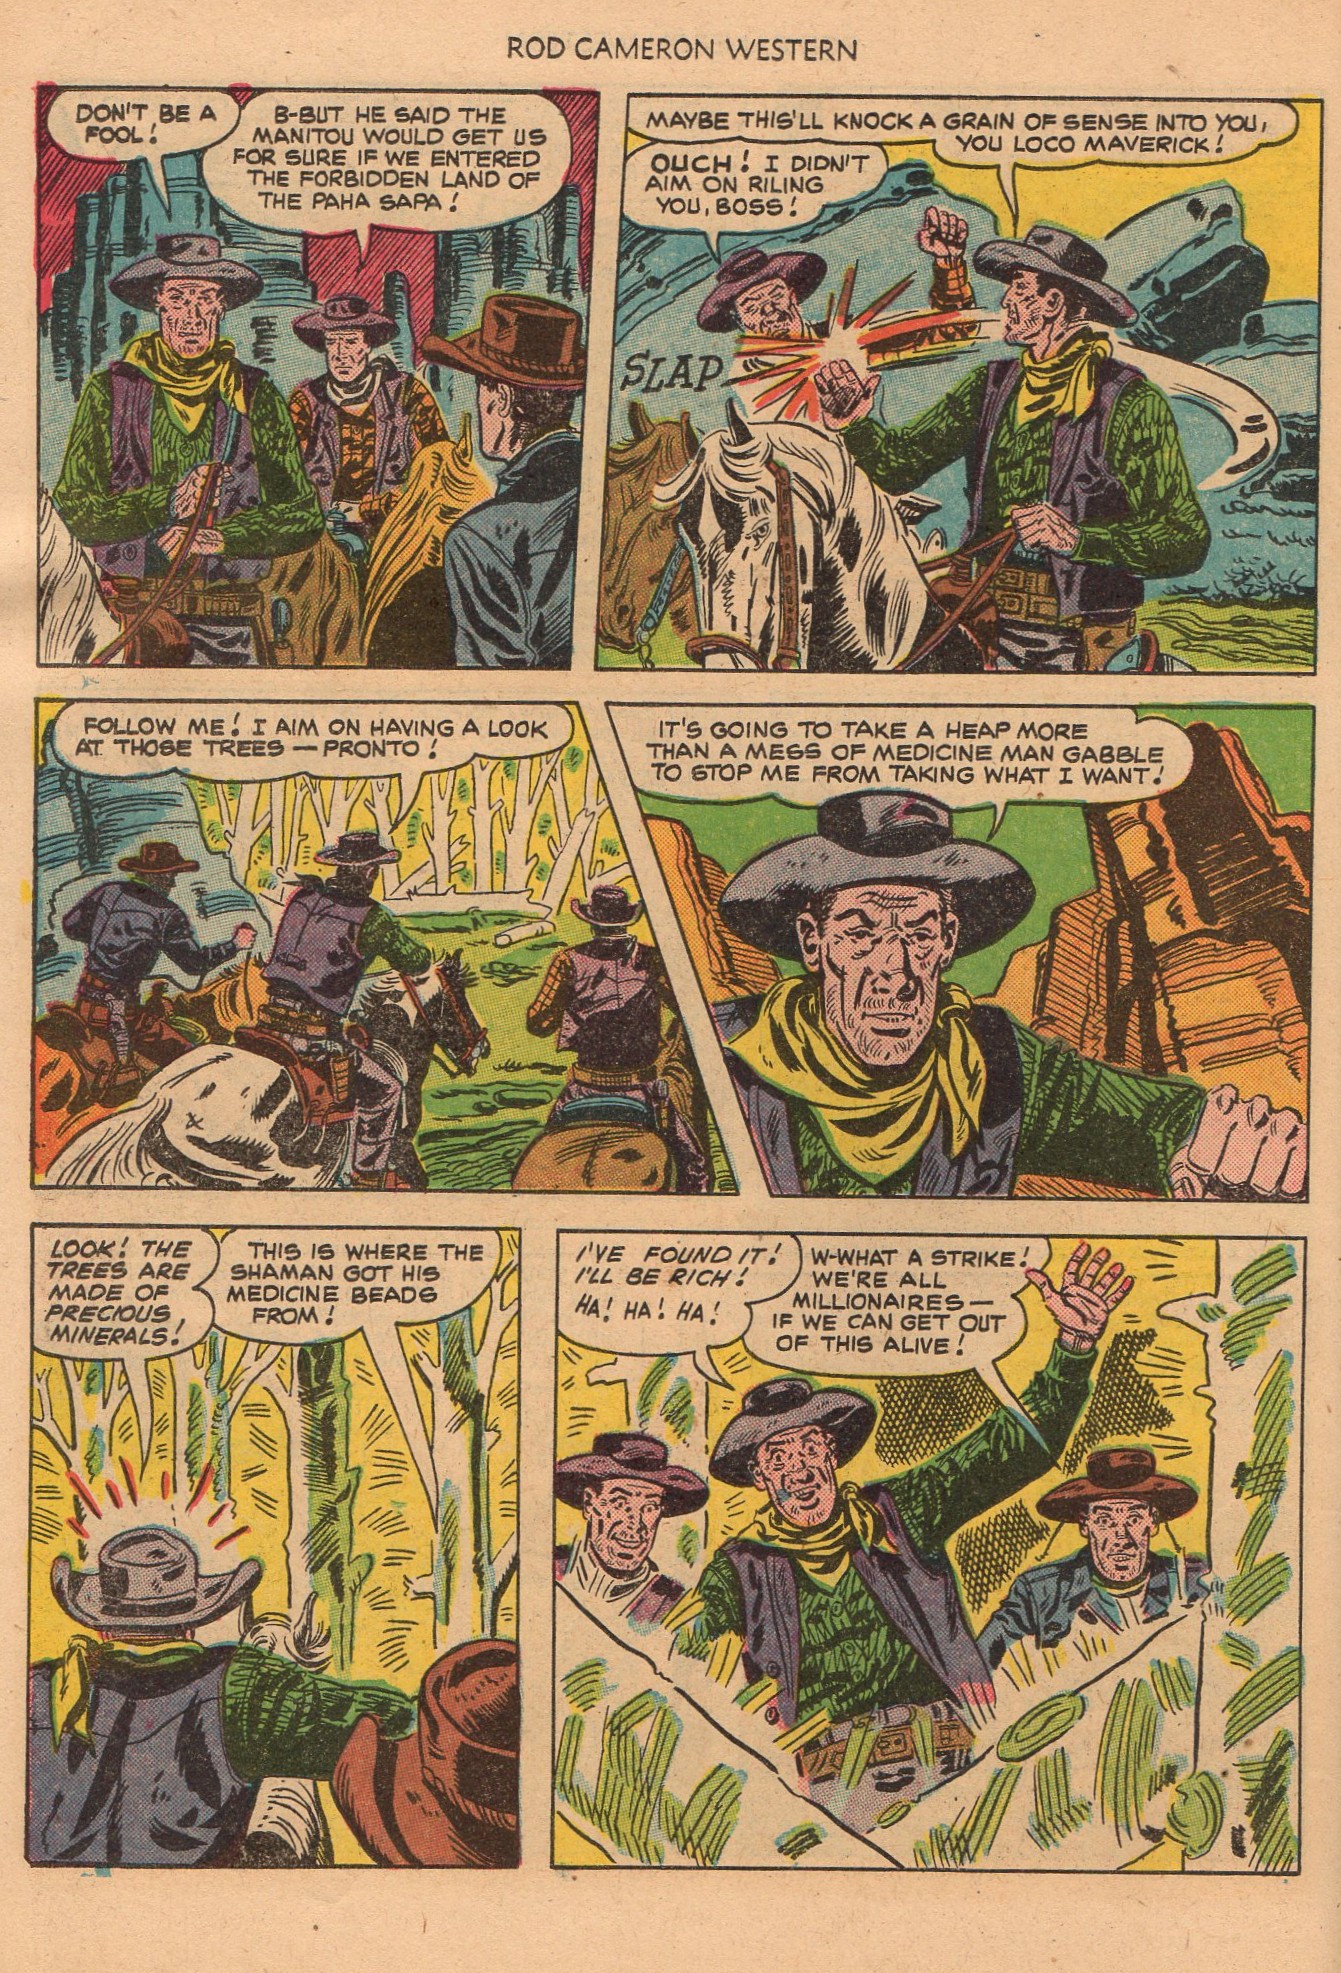 Read online Rod Cameron Western comic -  Issue #6 - 26